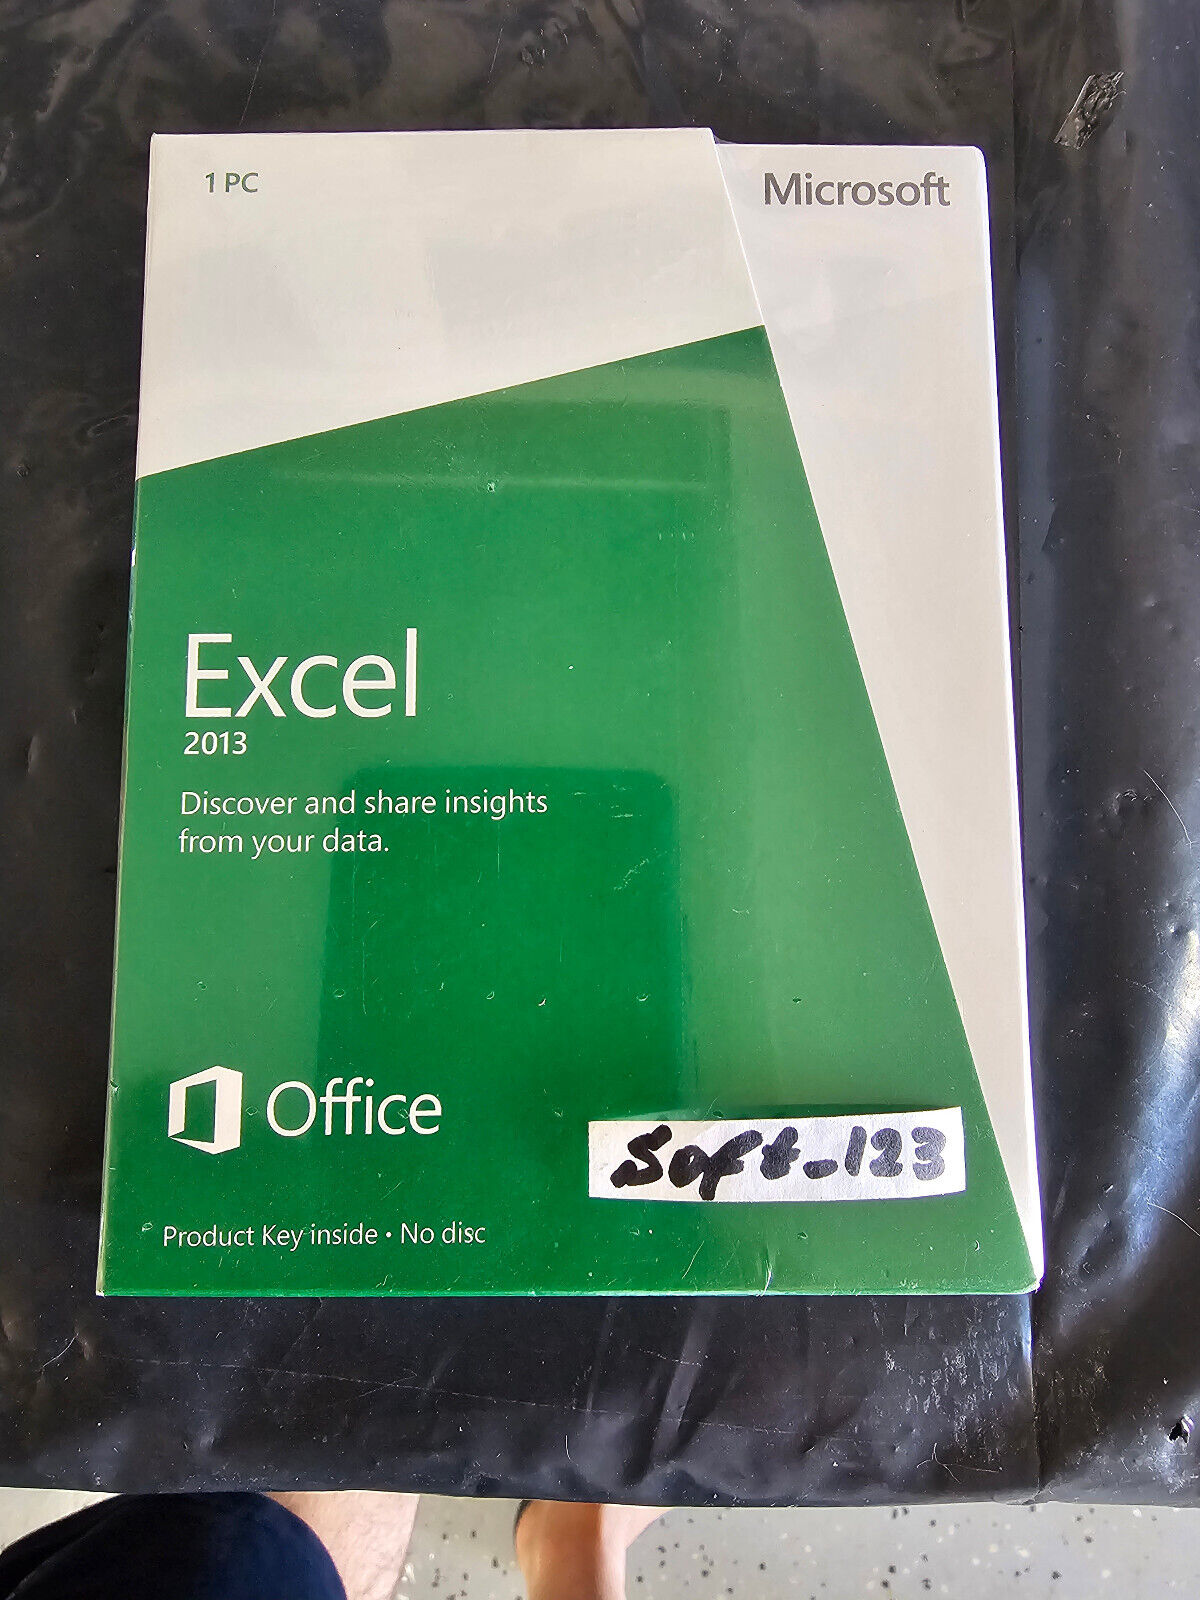 Microsoft Excel 2013 Product Key Card Full Retail Version for 2 PCs =SEALED BOX=